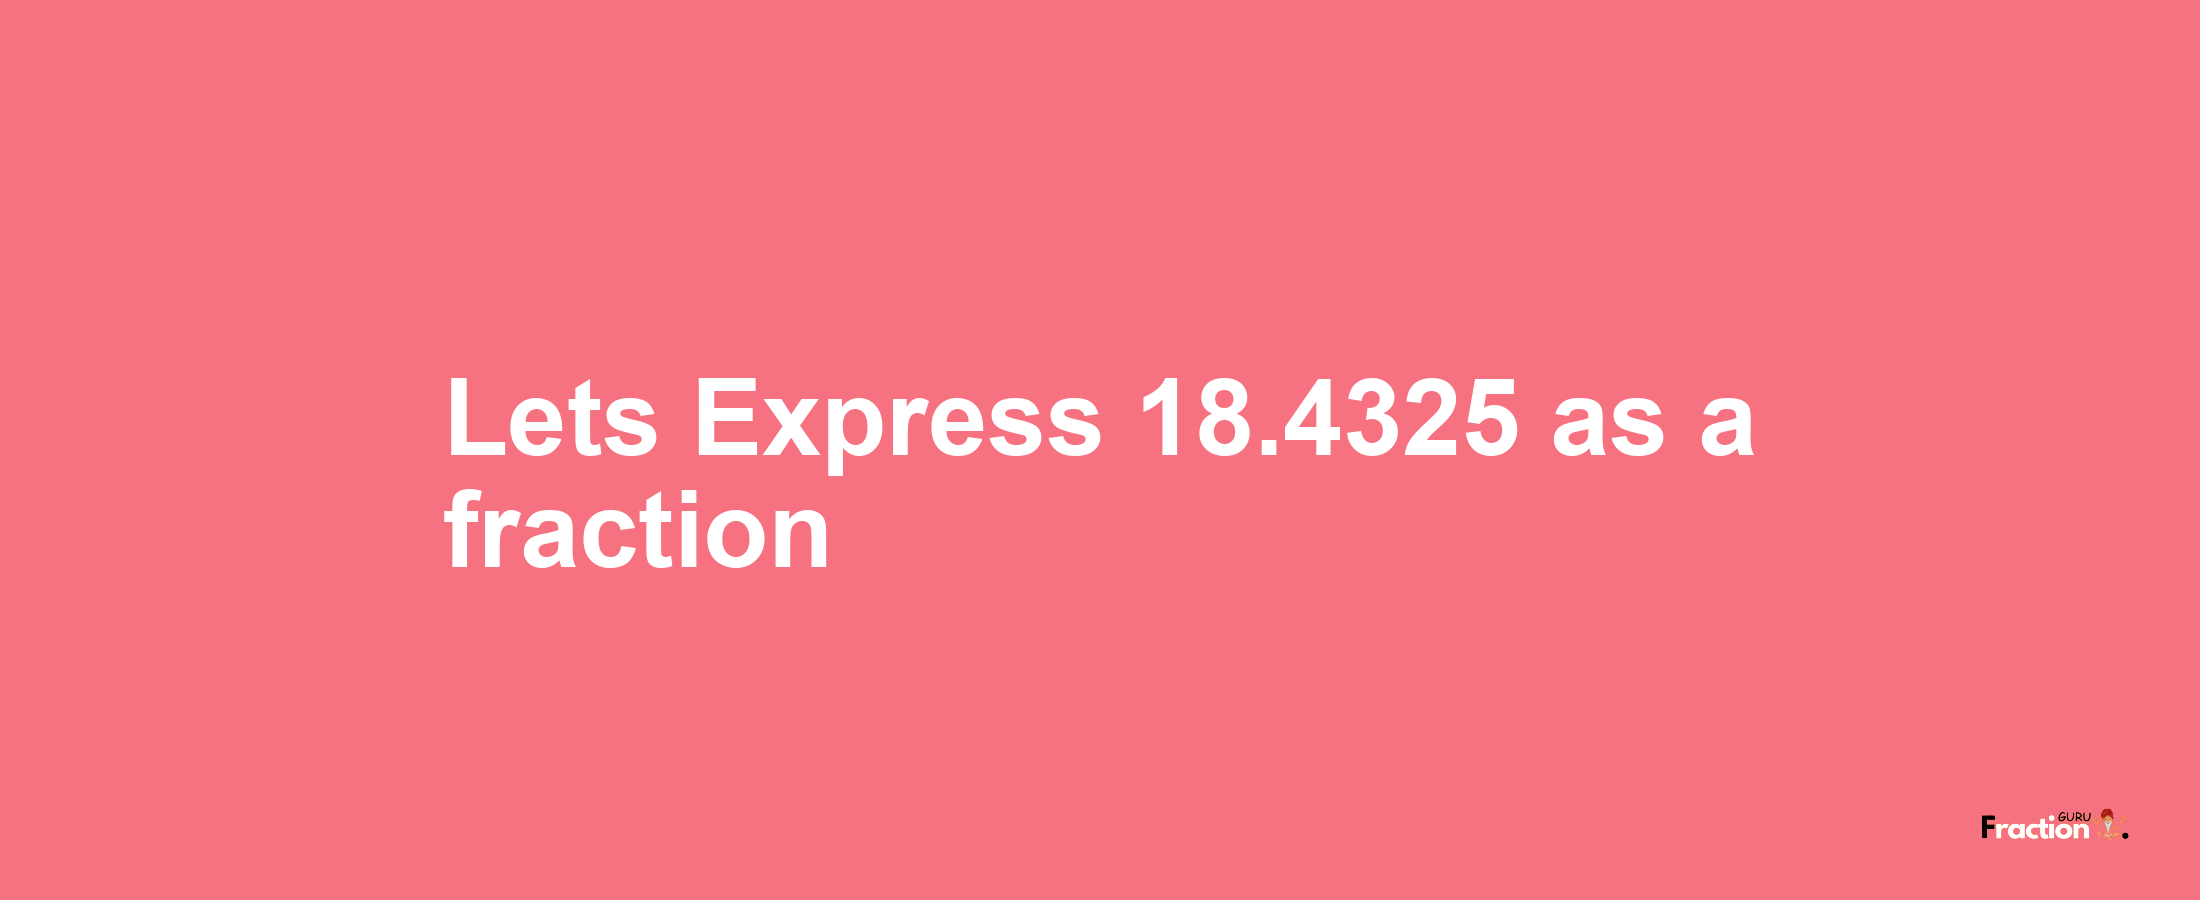 Lets Express 18.4325 as afraction